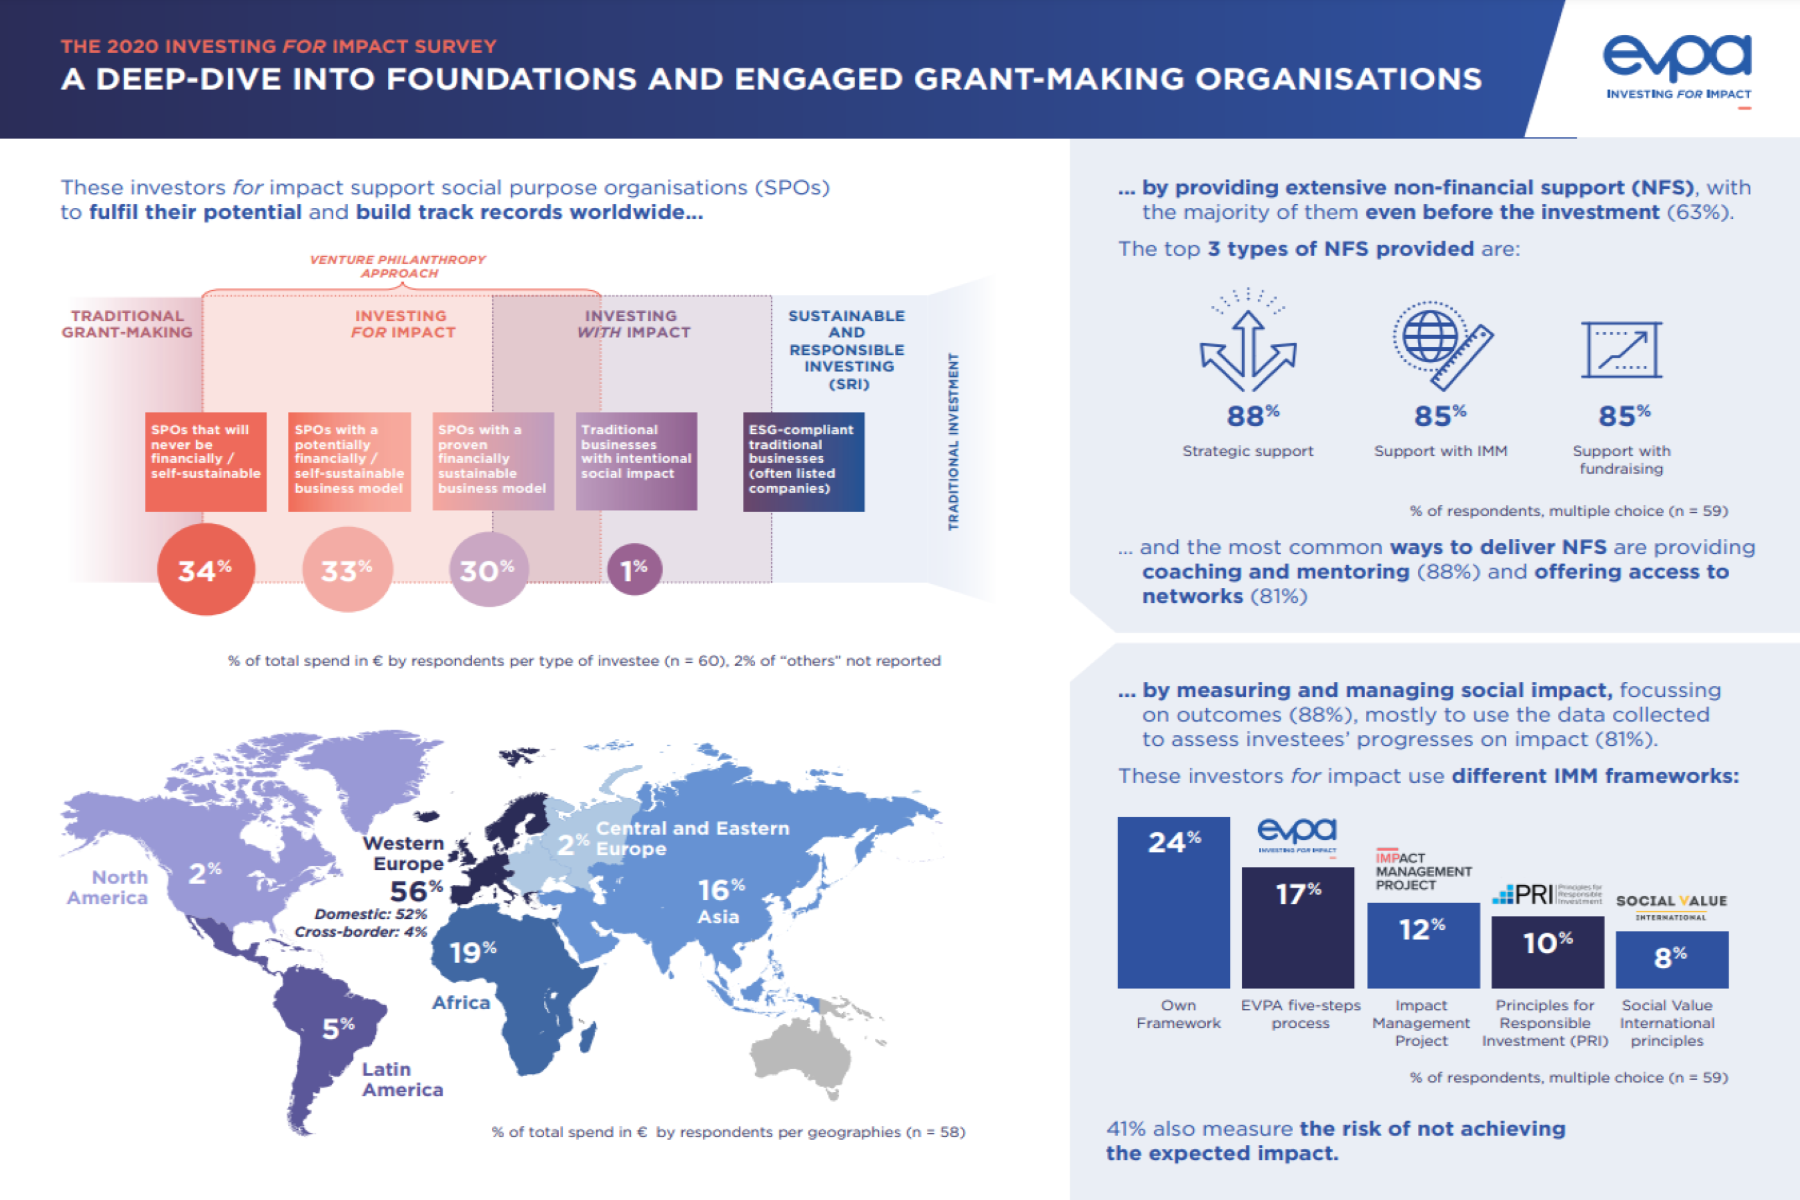 The 2020 Investing for Impact Survey - A Deep-Dive into Foundations and Engaged Grant-Making Organisations